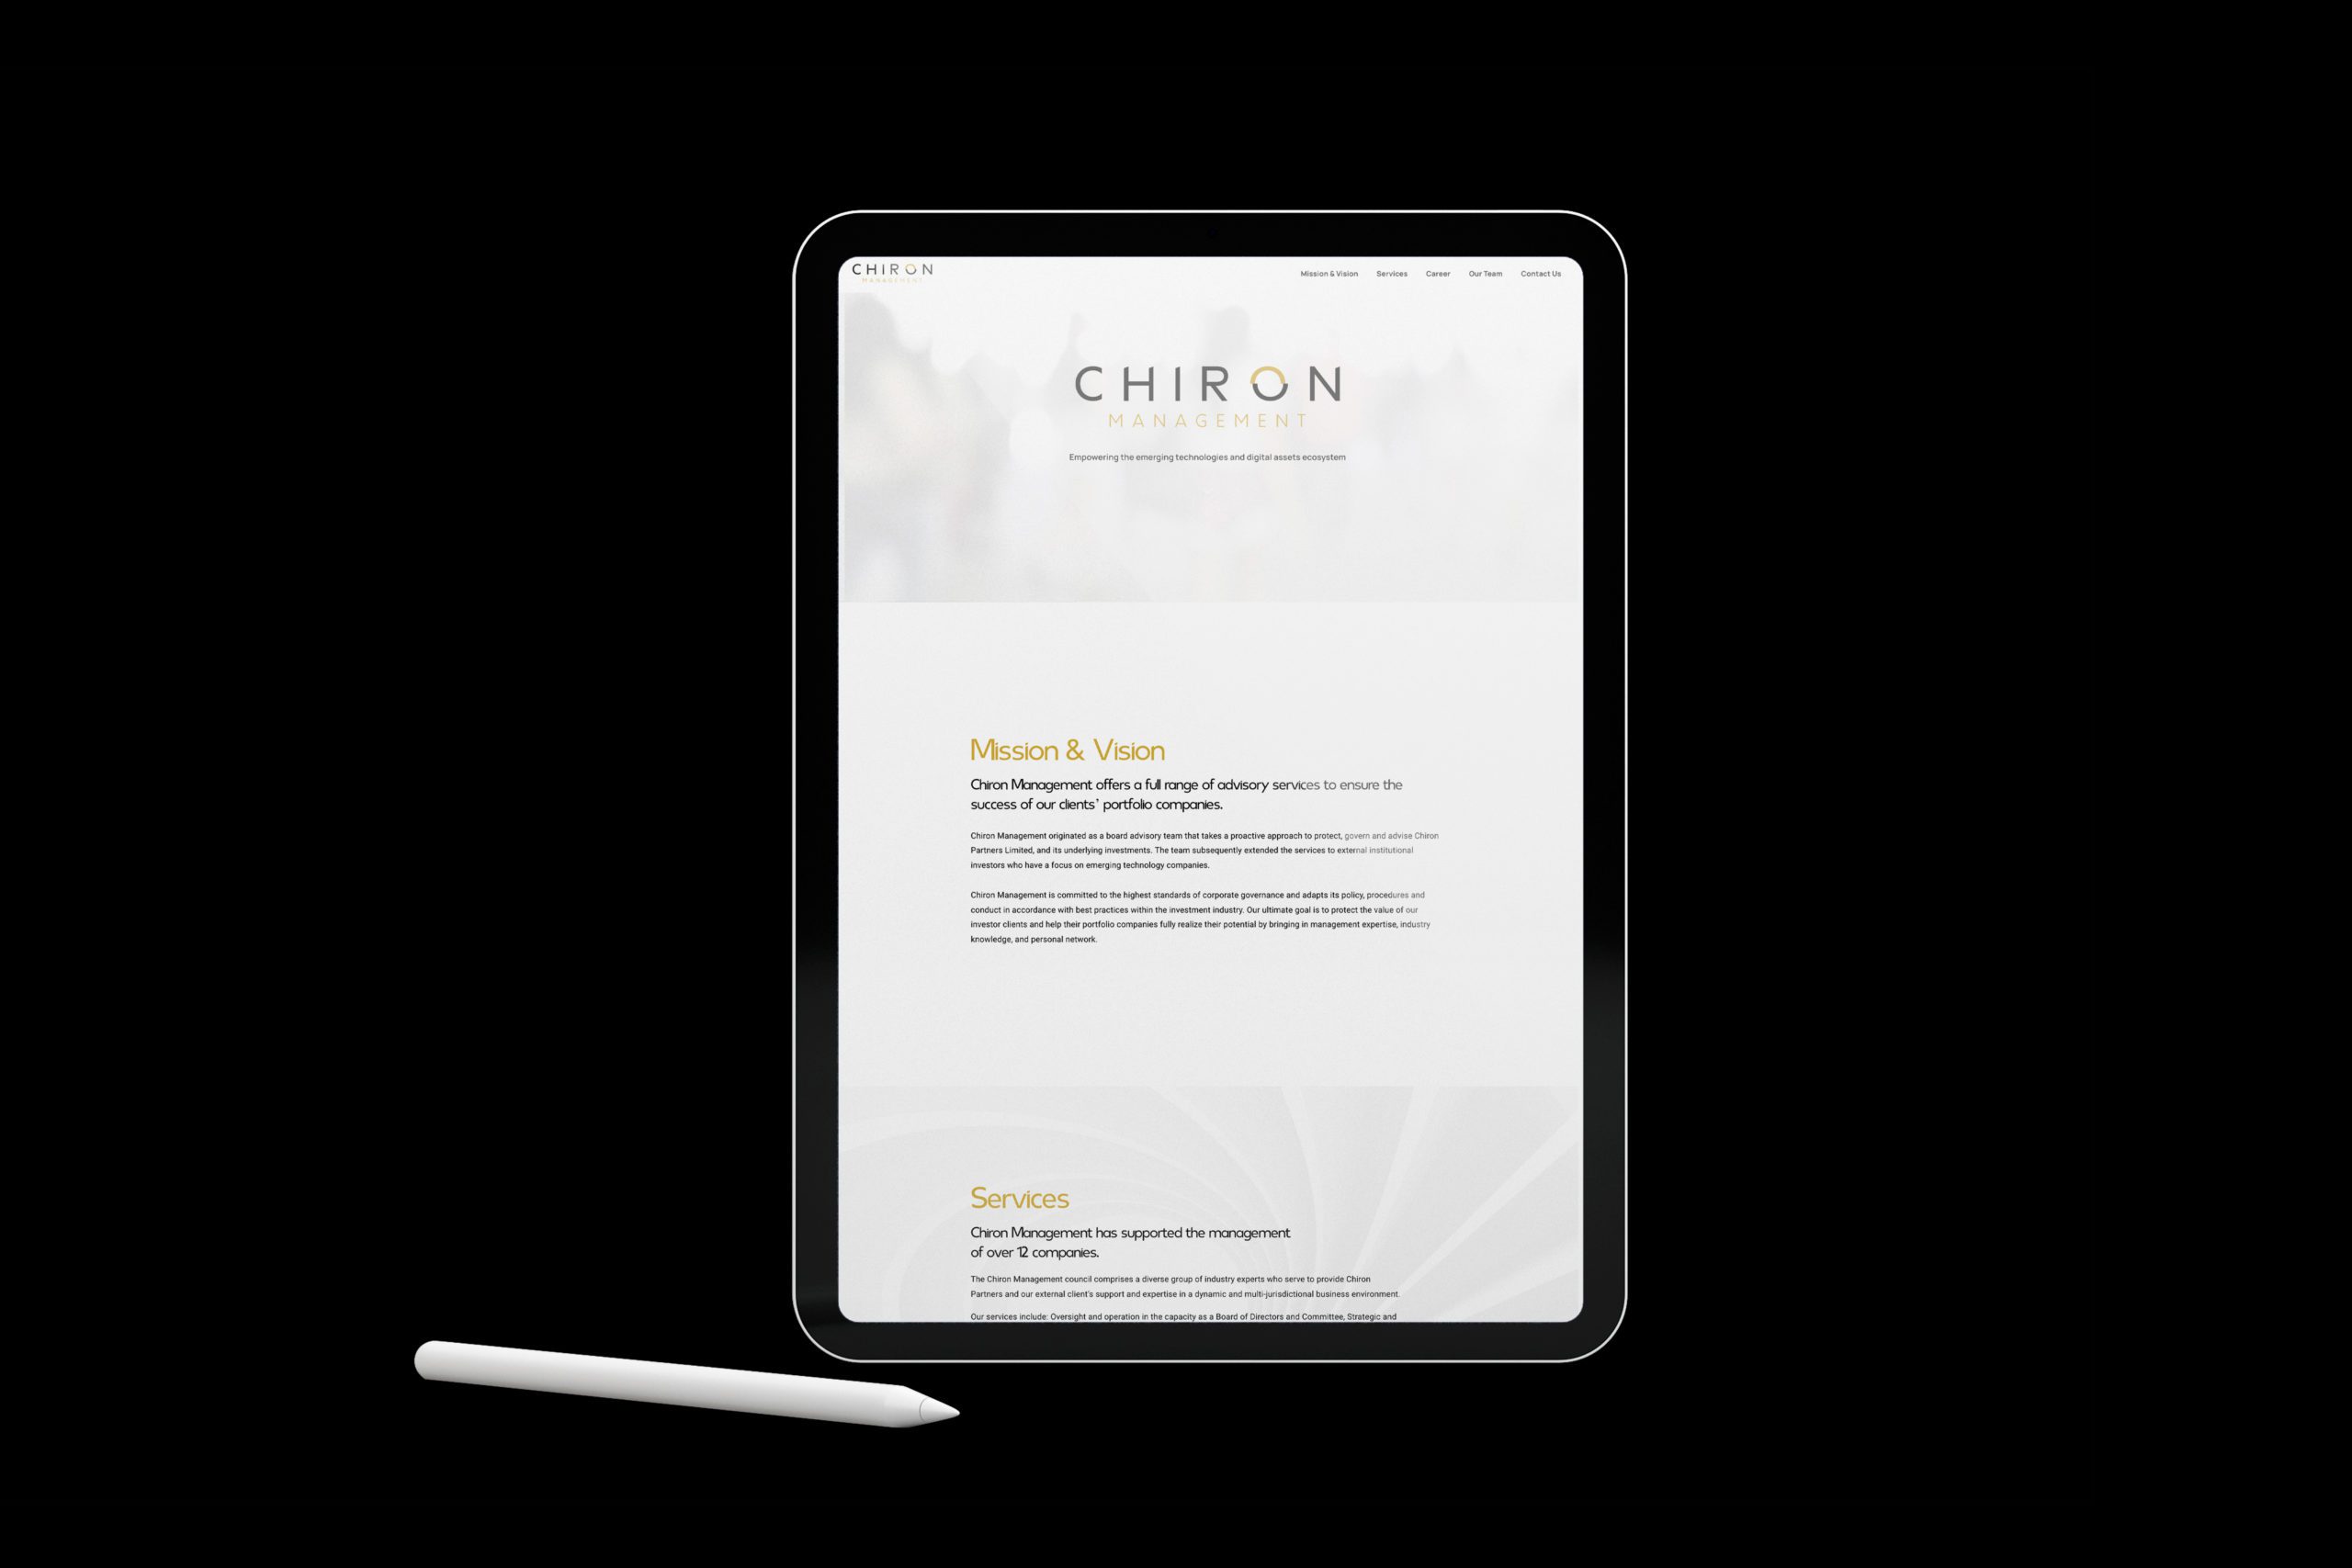 Chiron Management website shown on tablet with black background